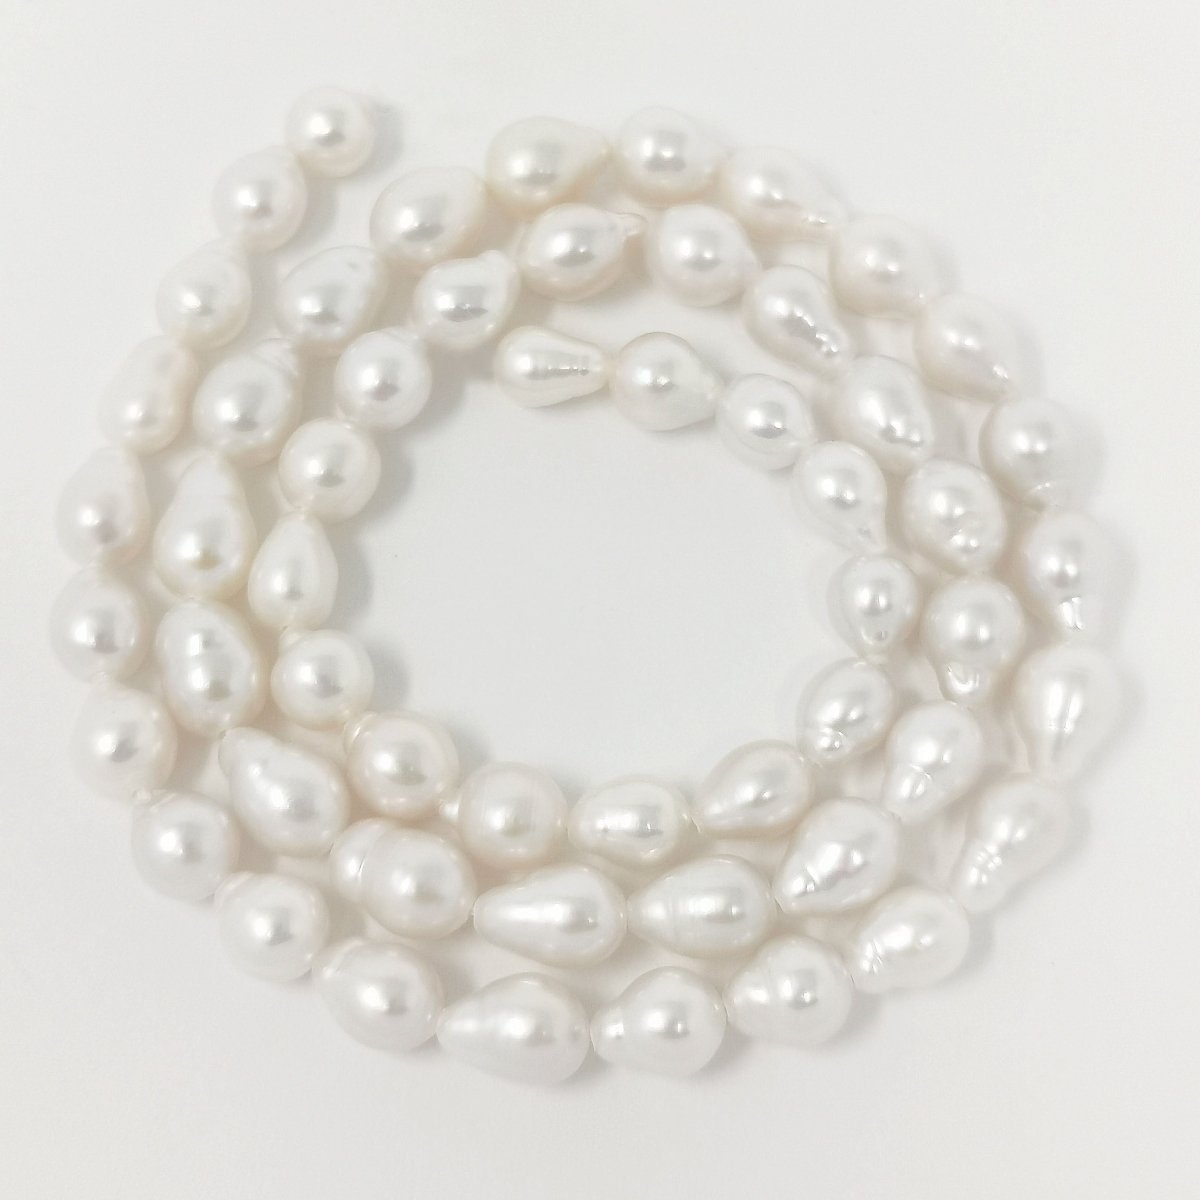 3-3.5mm AAA Natural White Tiny Seed Rice Freshwater Pearl Beads, Genuine Freshwater Pearls,Cultured White Small Seed Pearls,Tiny Pearls - DLUXCA